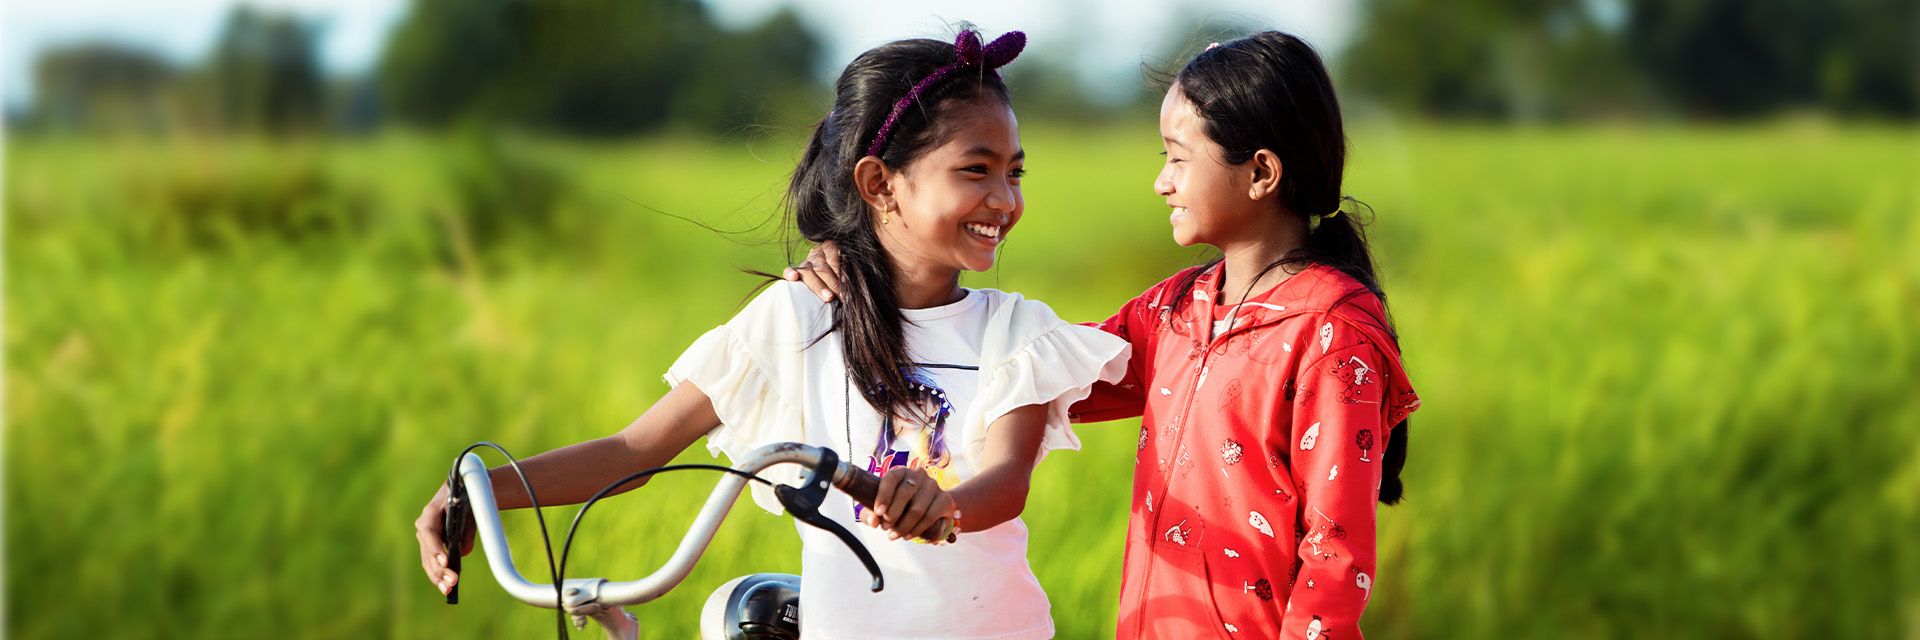 Two young girls smile at each other as they stand in a grass field with a bicycle.